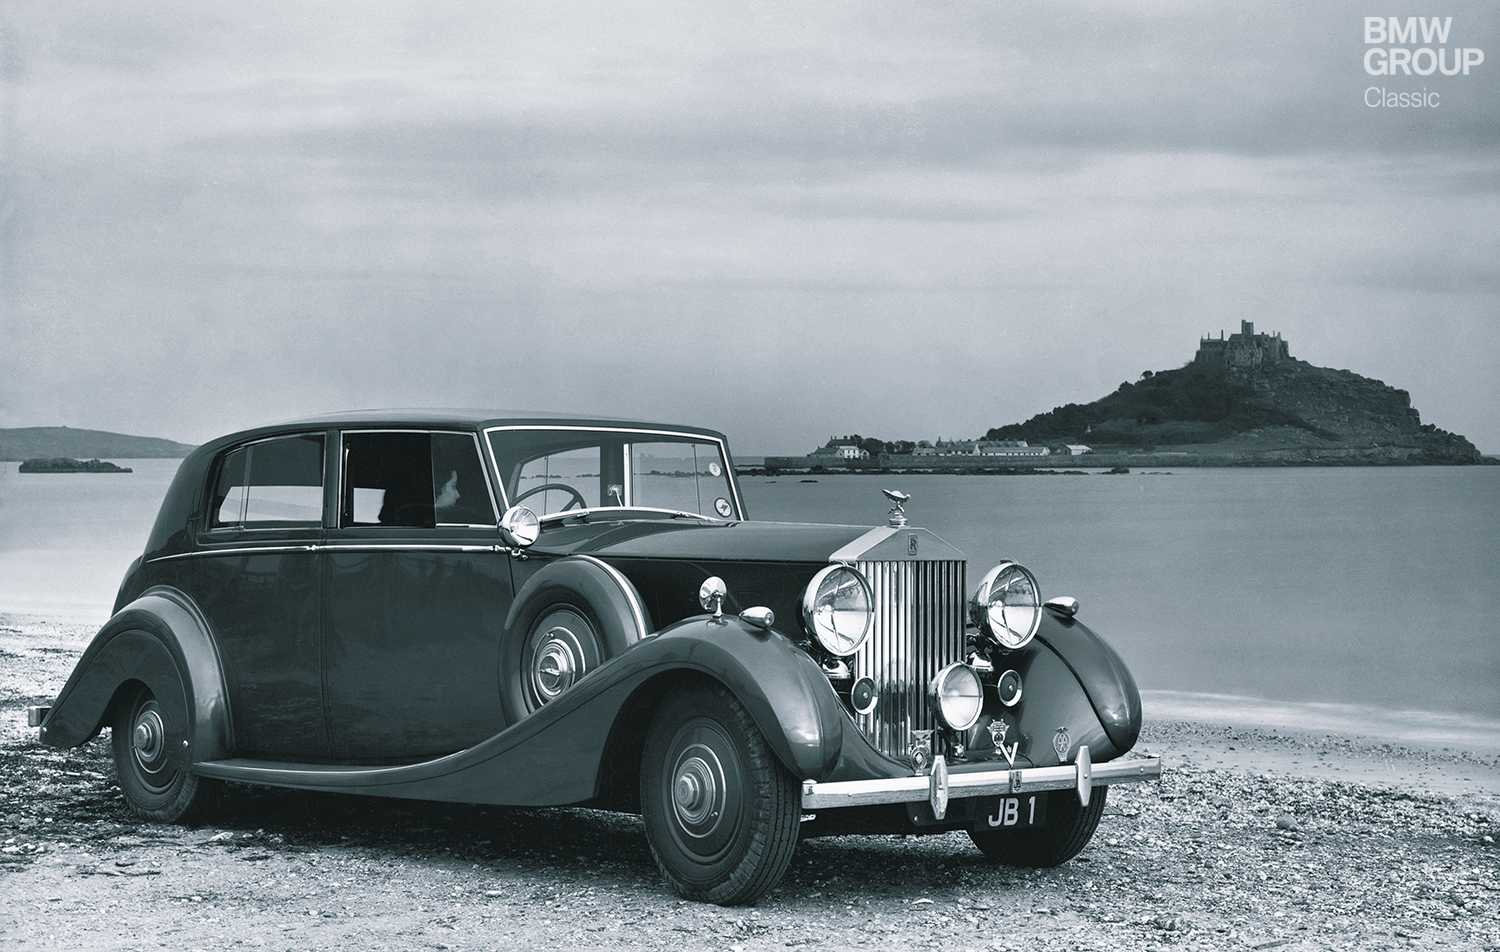 For Sale RollsRoyce Silver Wraith 1952 offered for 64000